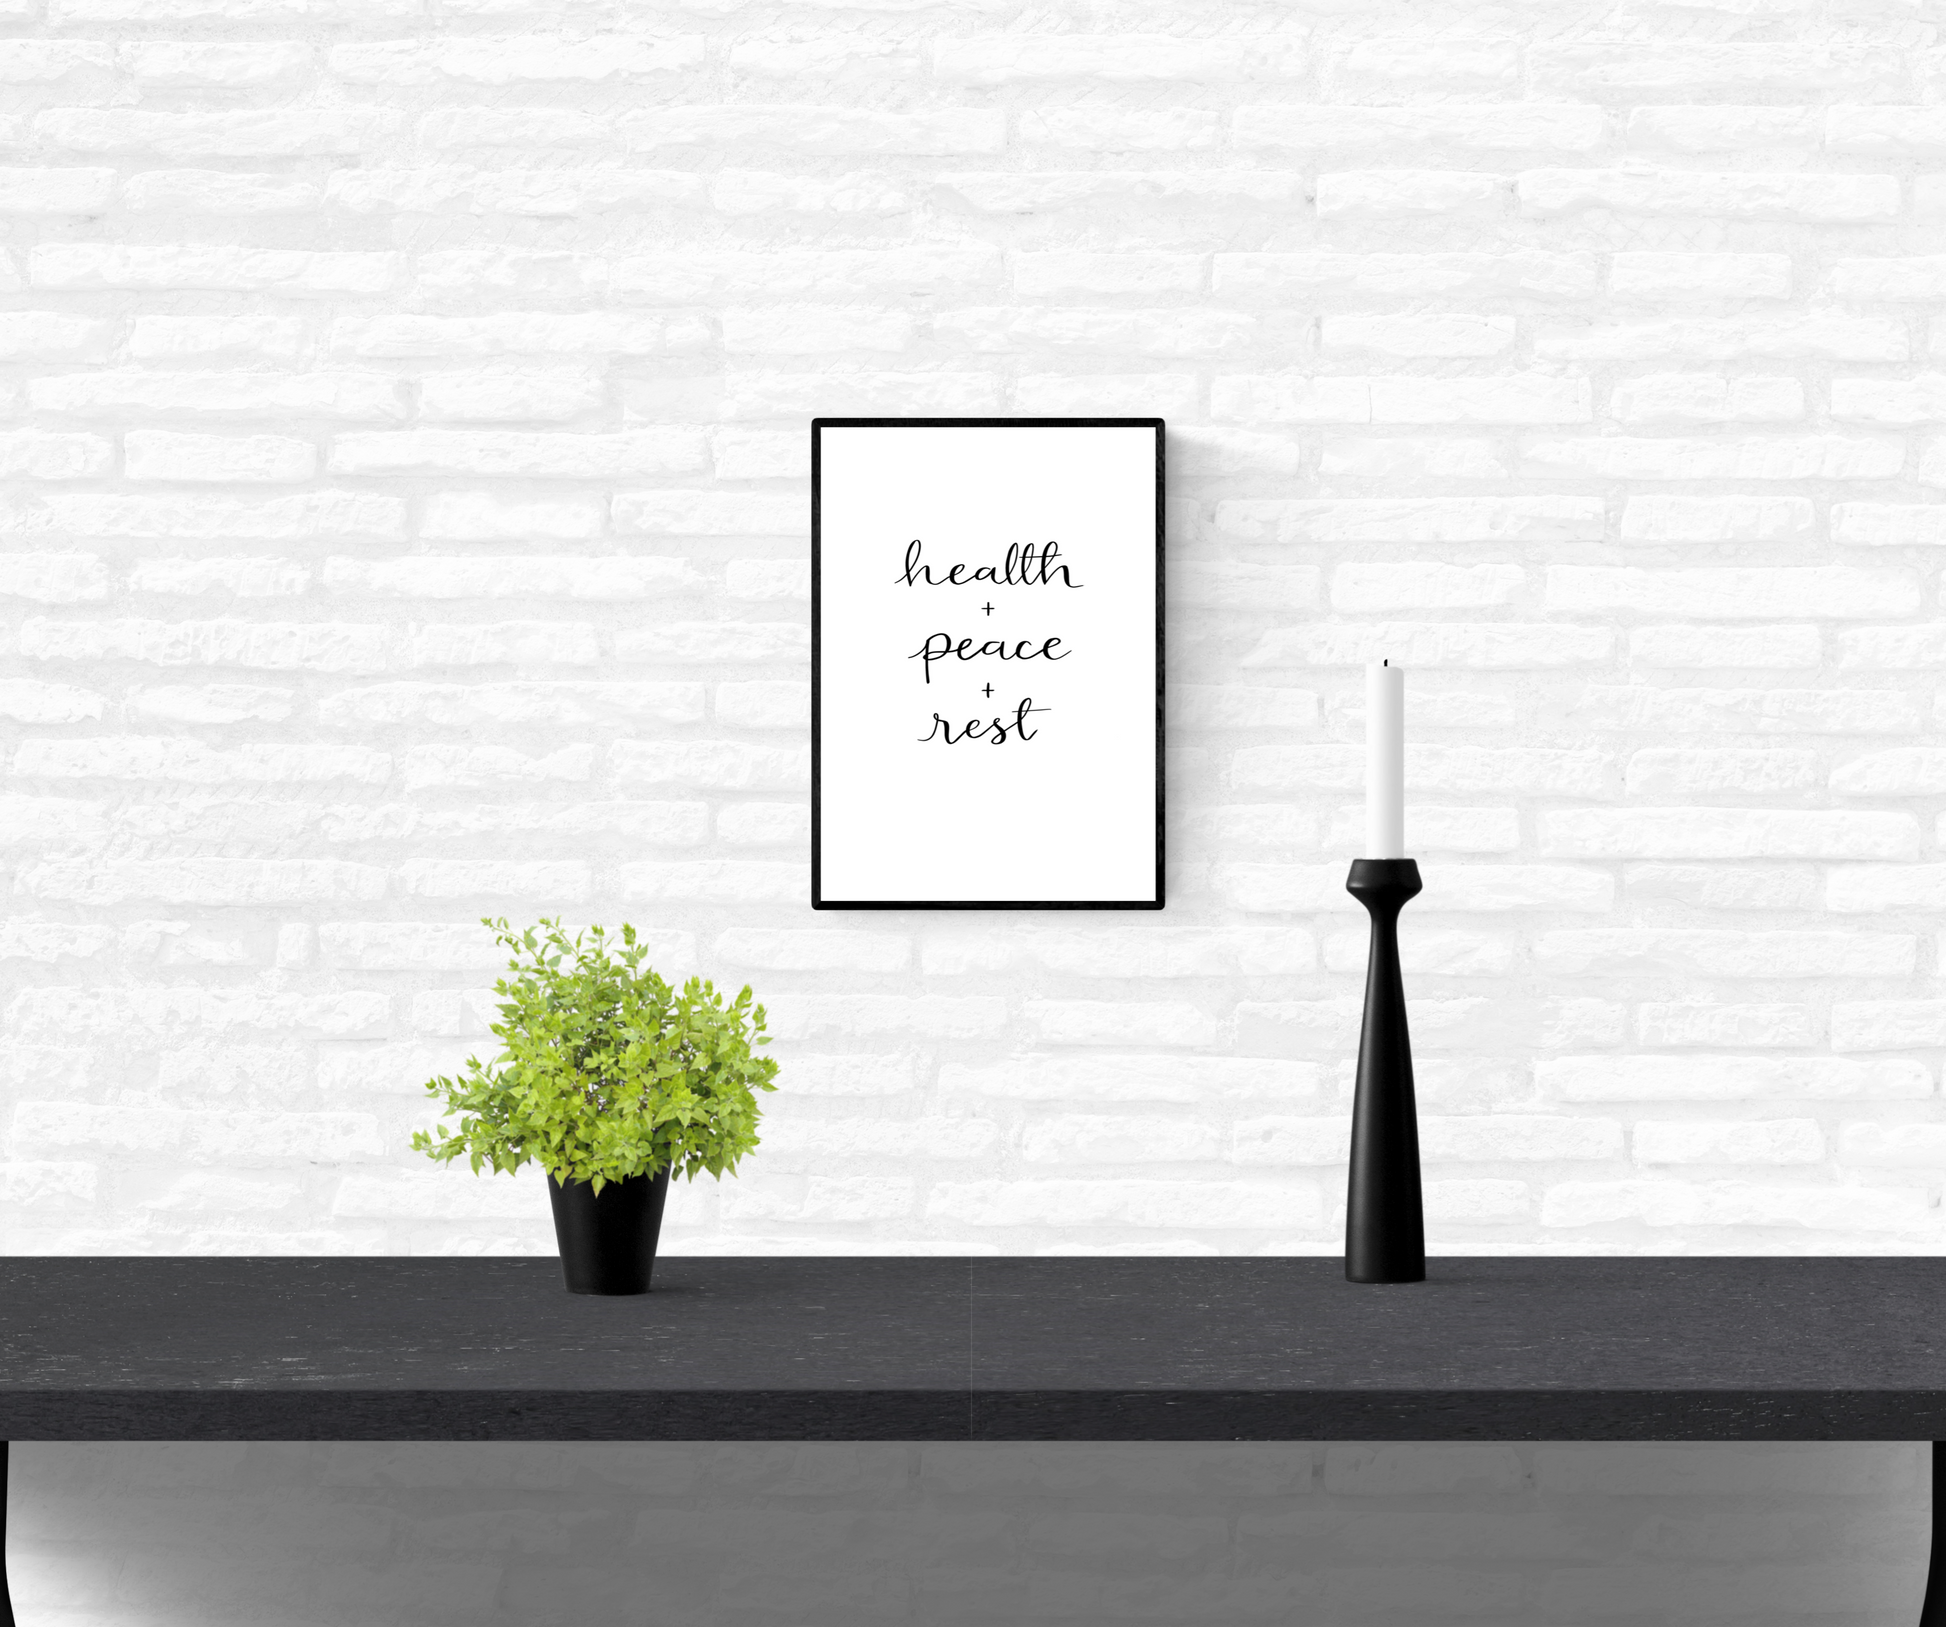 Framed and mounted wall quote print on an interior white brick wall with the words “health + peace + rest”